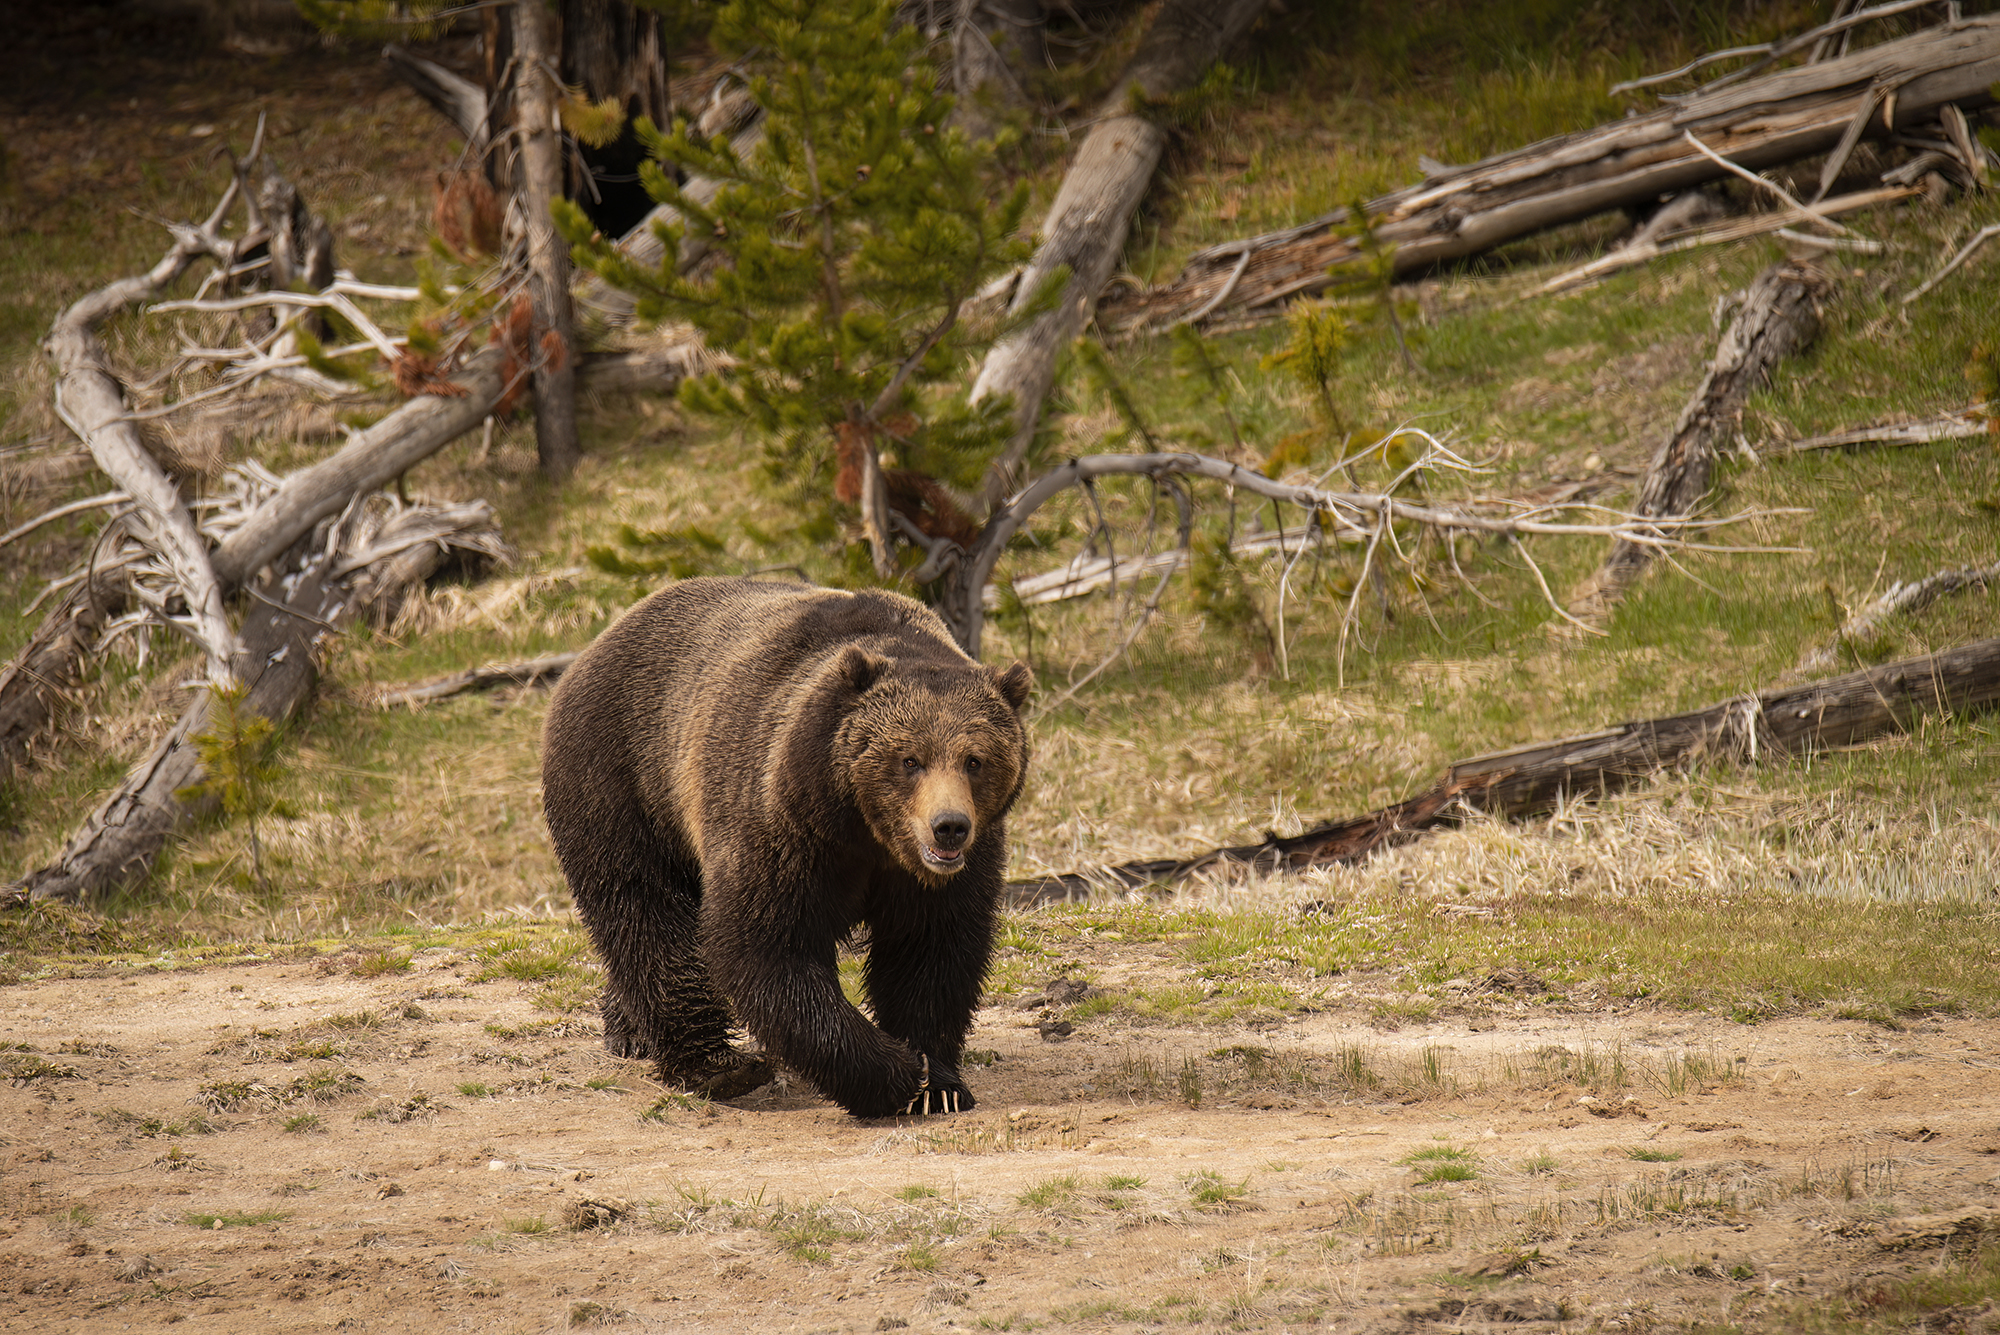 Video: Large Male Grizzly Kills Another Bear in Yellowstone National Park